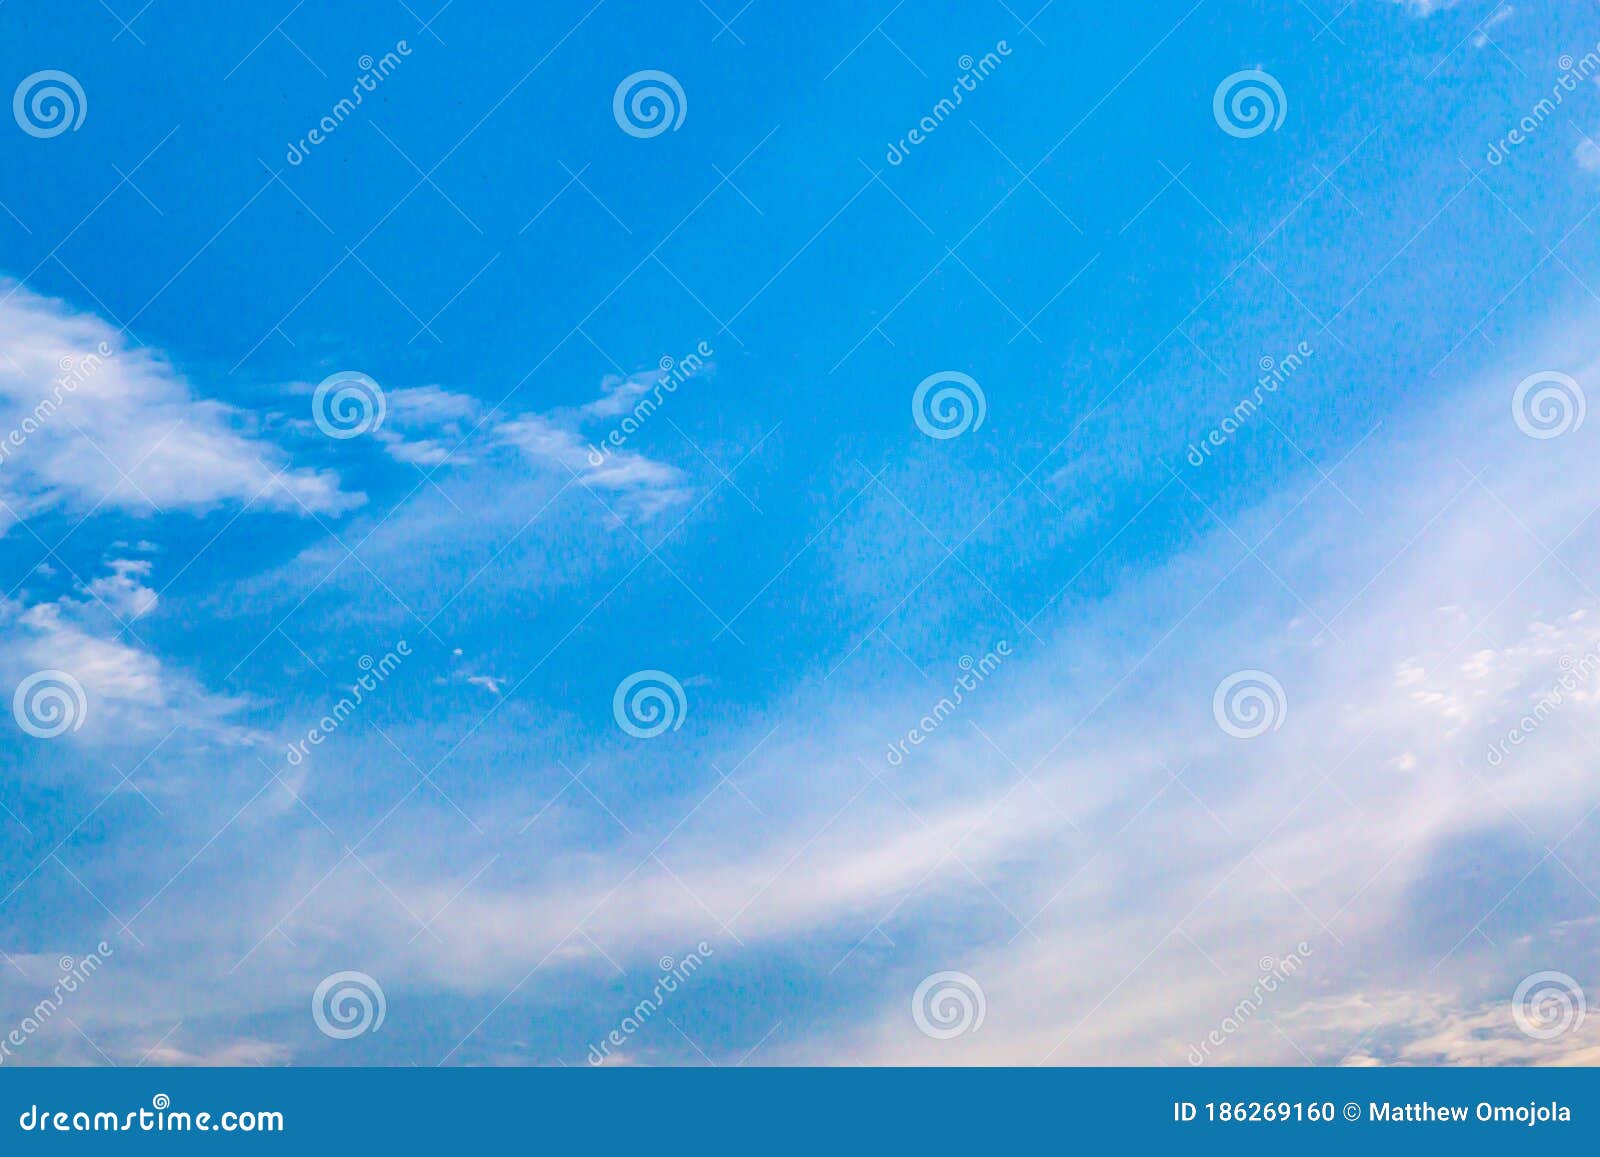 beautiful skies and clouds for background